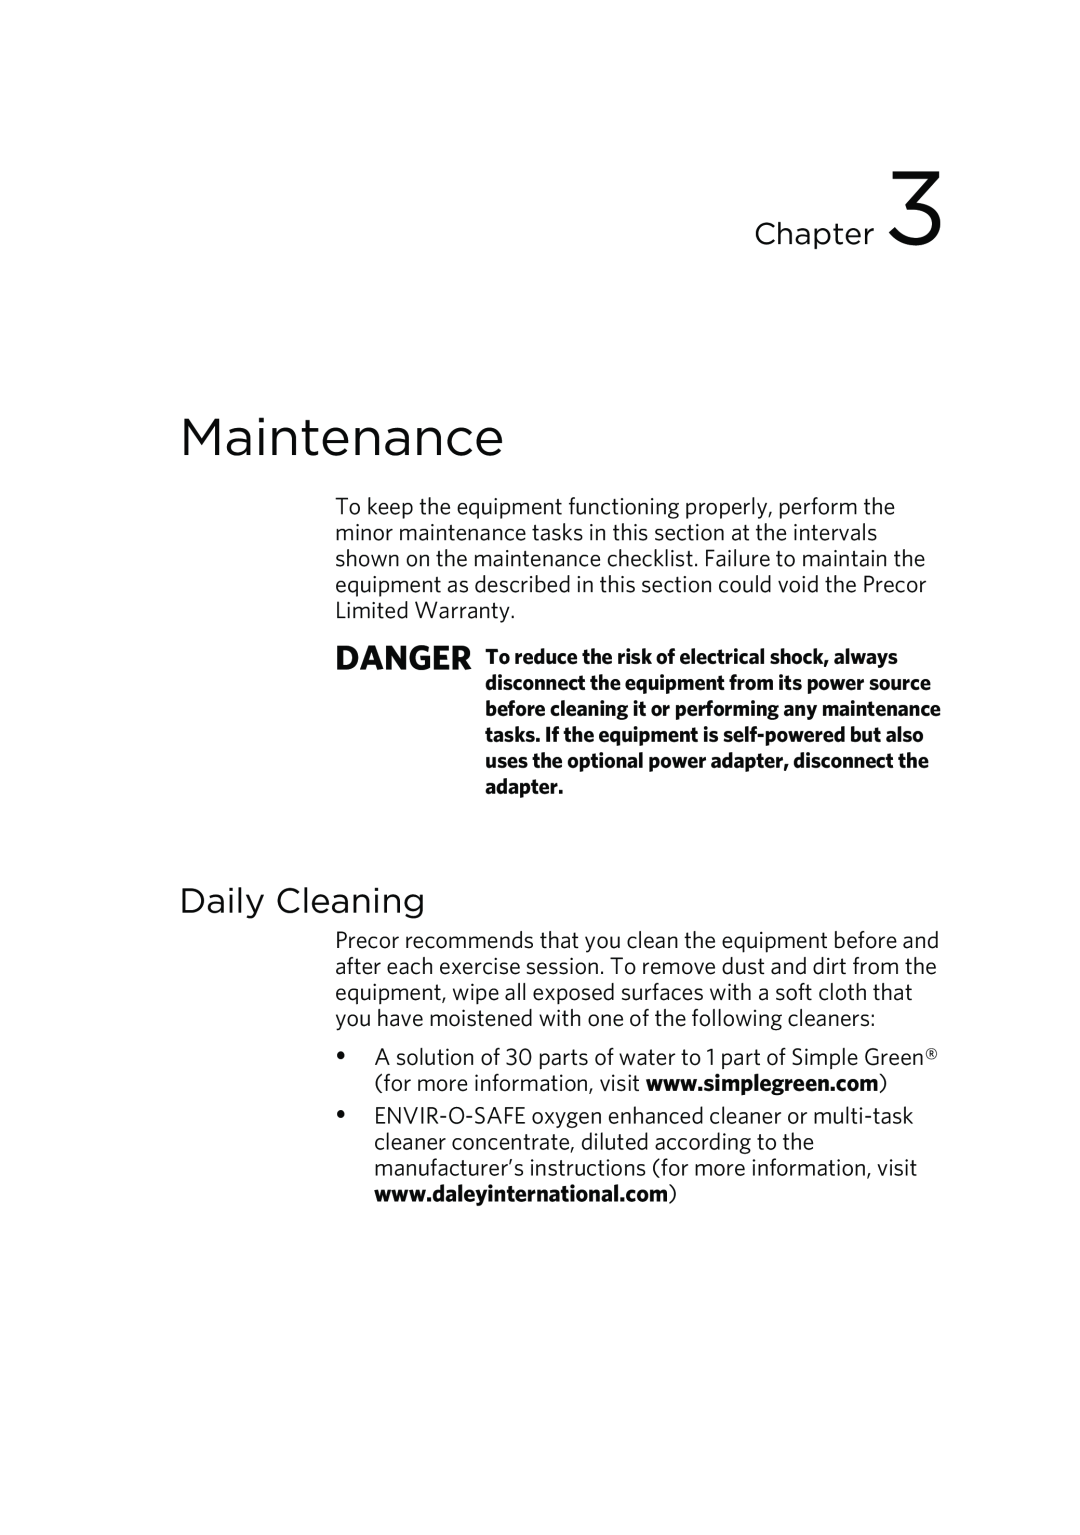 Precor P80 manual Daily Cleaning, Maintenance, Chapter 